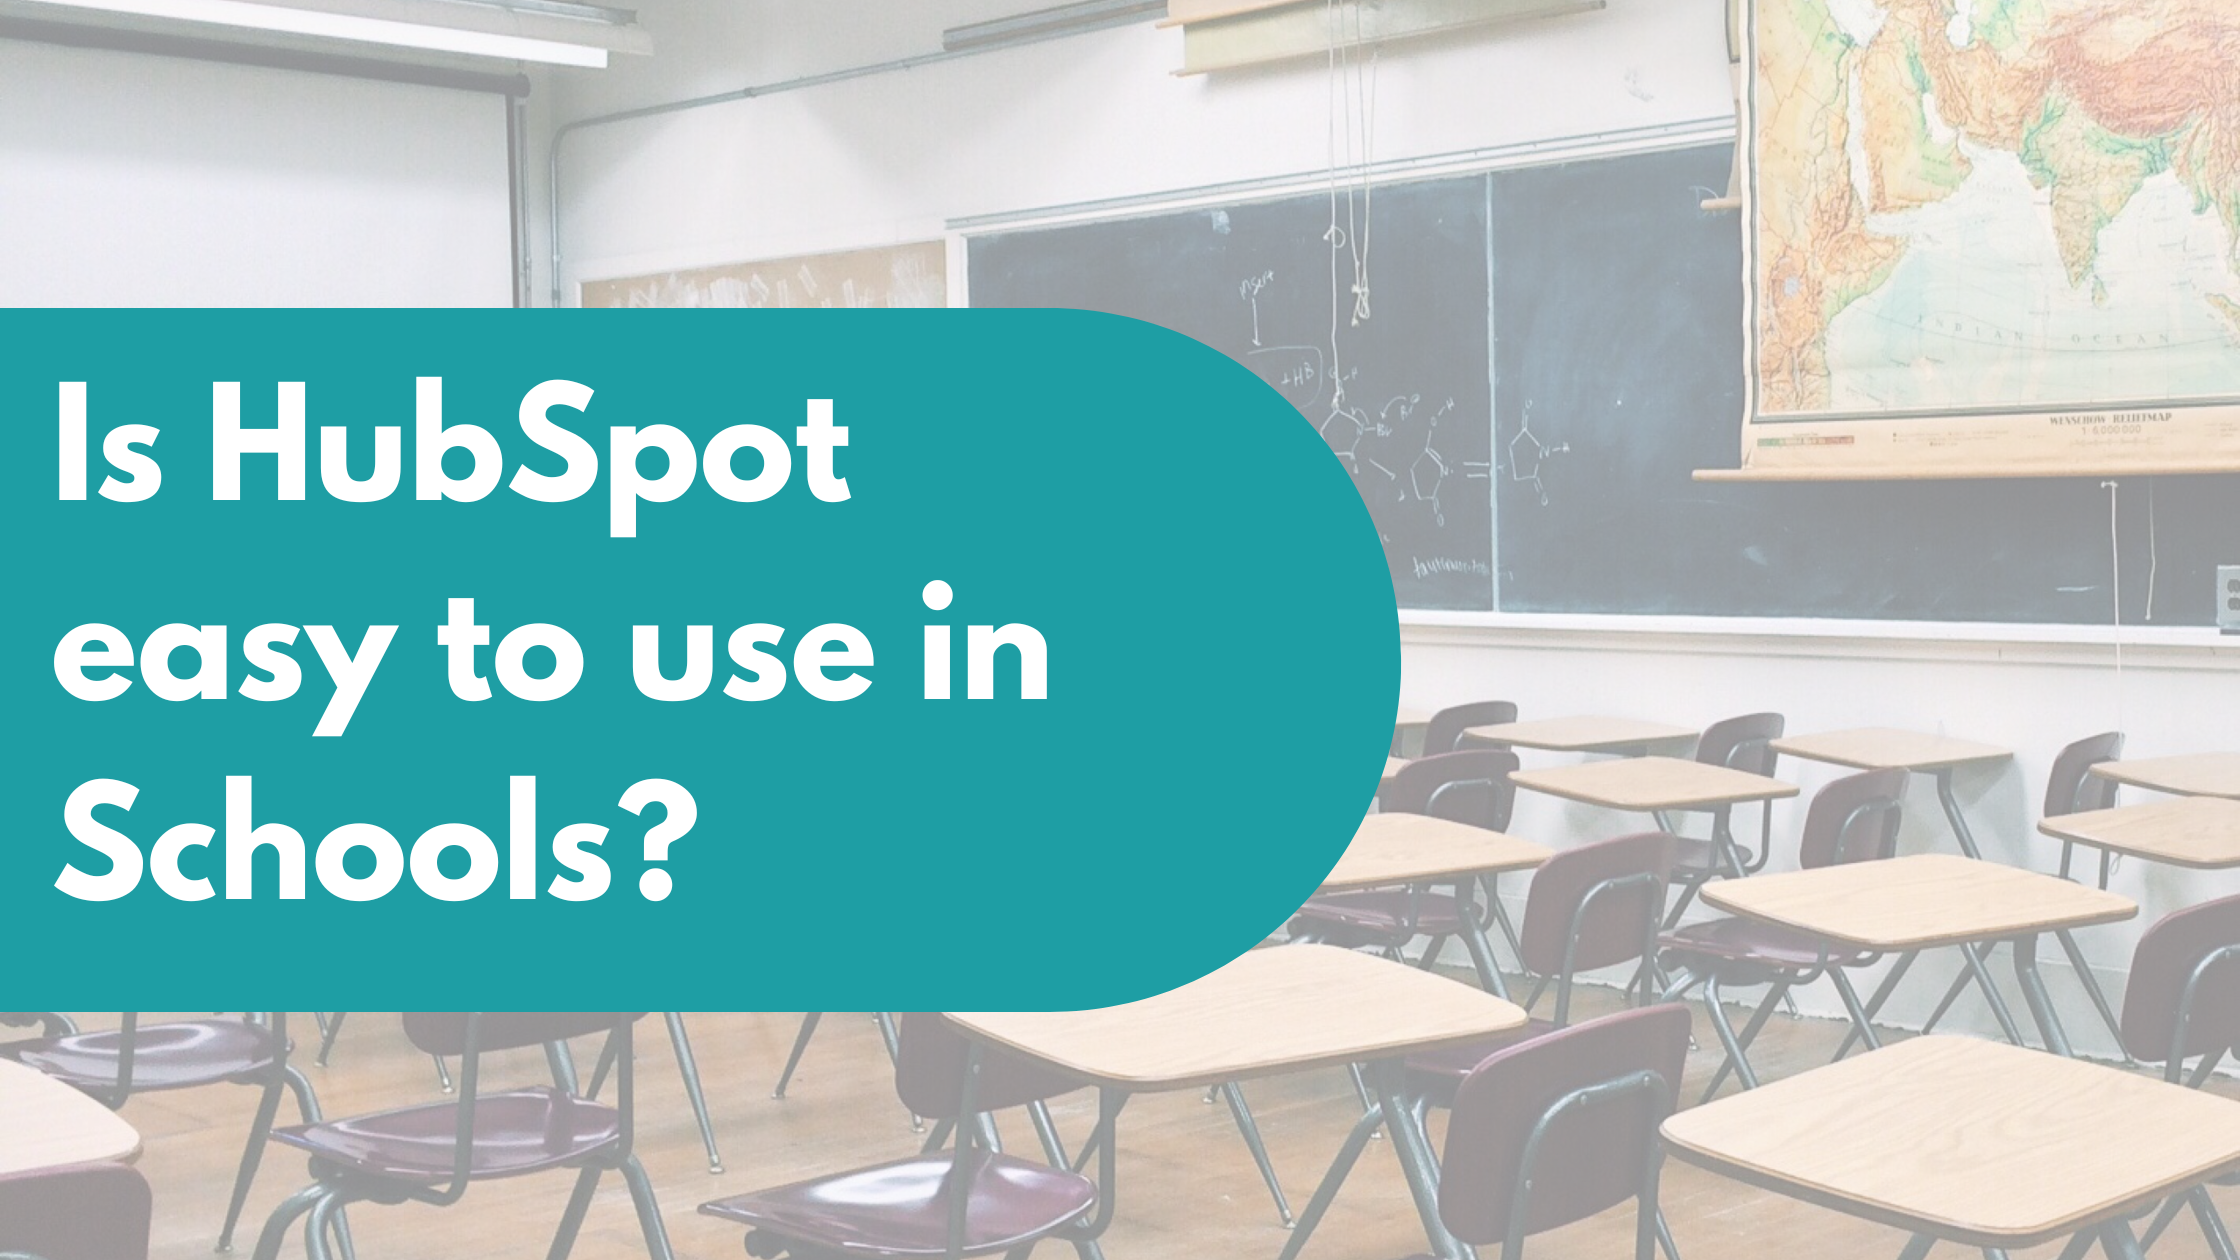 How easy to use is HubSpot for schools?